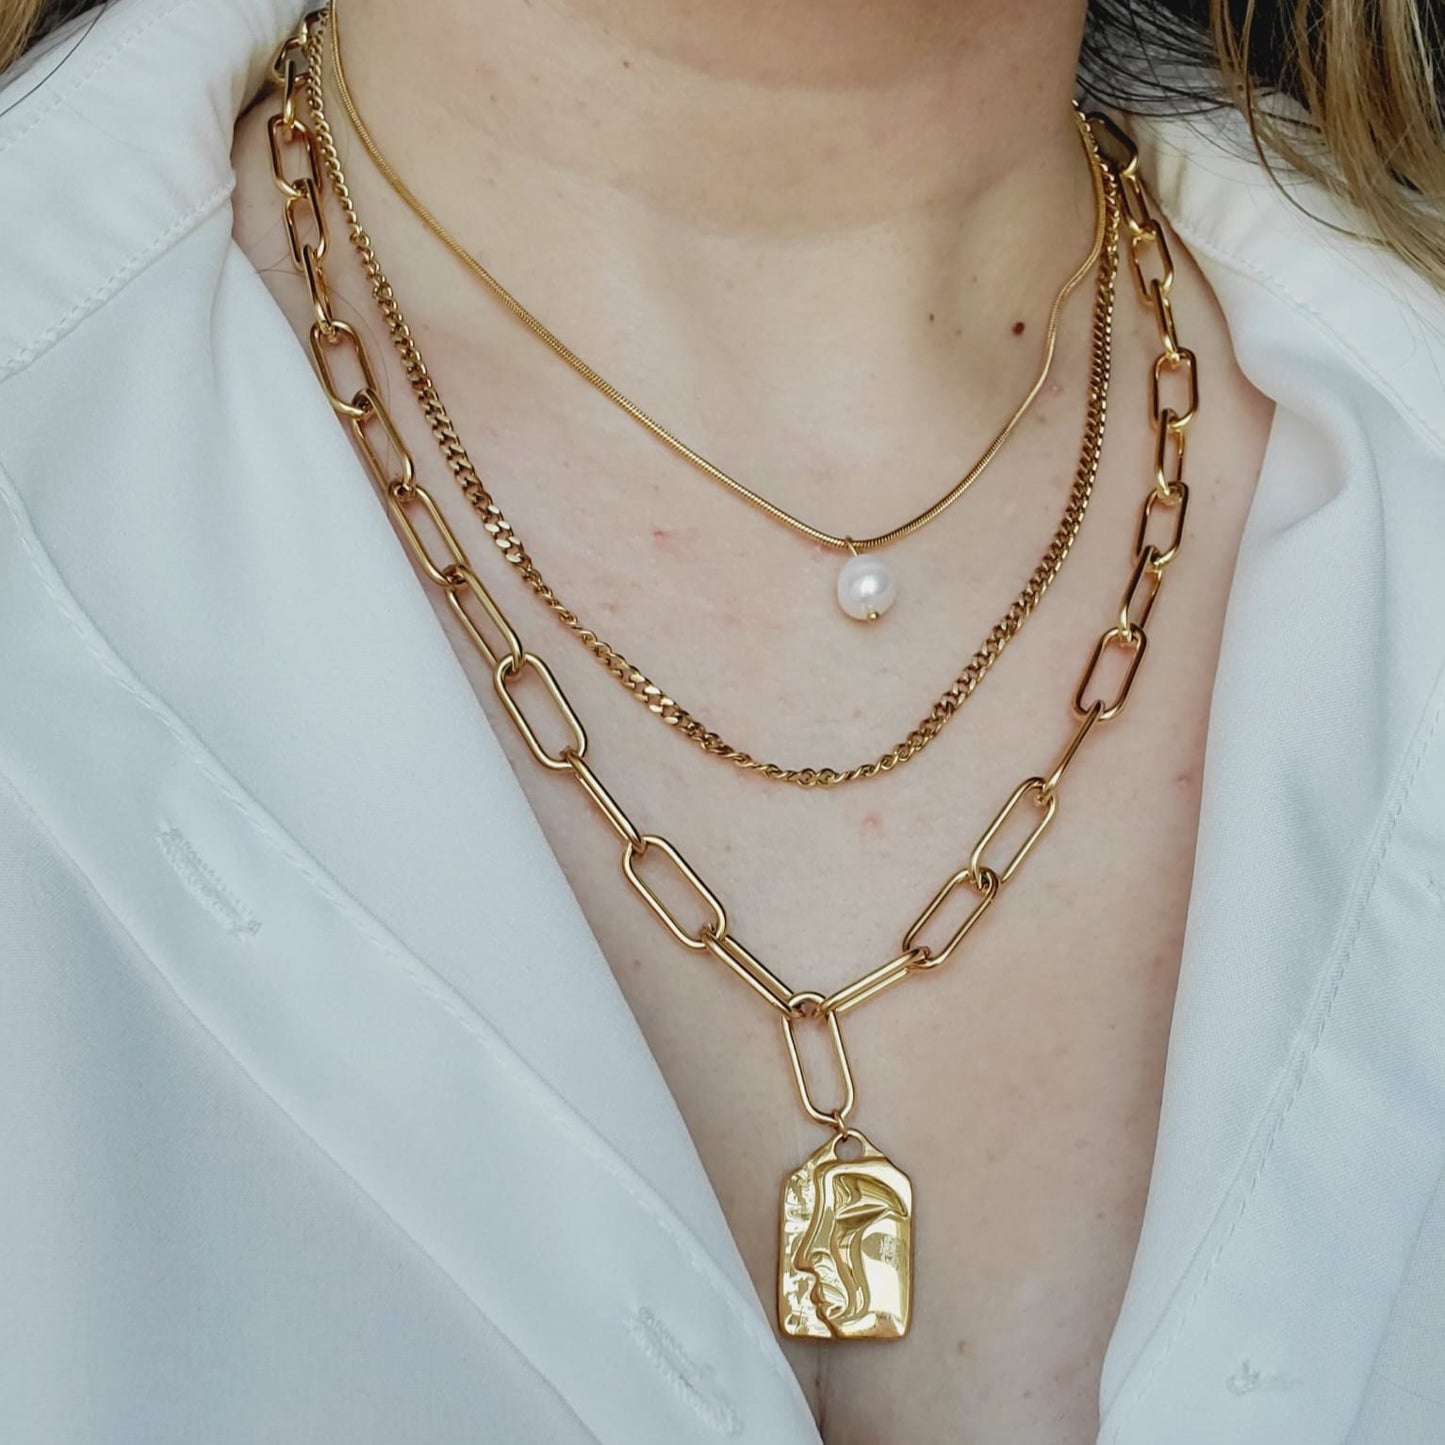 Minimalist chain, Gold filled Chain, Flat Gold Necklace, Snake Chain, Water resistant jewelry, water resistant Necklace, Water resistant bracelet, vintage jewelry, vintage jewelry, vintage necklace, 14k gold necklace, 14k gold jewelry, 14k gold necklace, fine jewelry, fine necklace, fine bracelet, snake gold necklace, bold necklace, bold jewelry, handmade jewelry, fine jewelry brand, hello luxy, joyeria fina, gold plated chain, 18k gold plated chain, Abstract Face Necklace